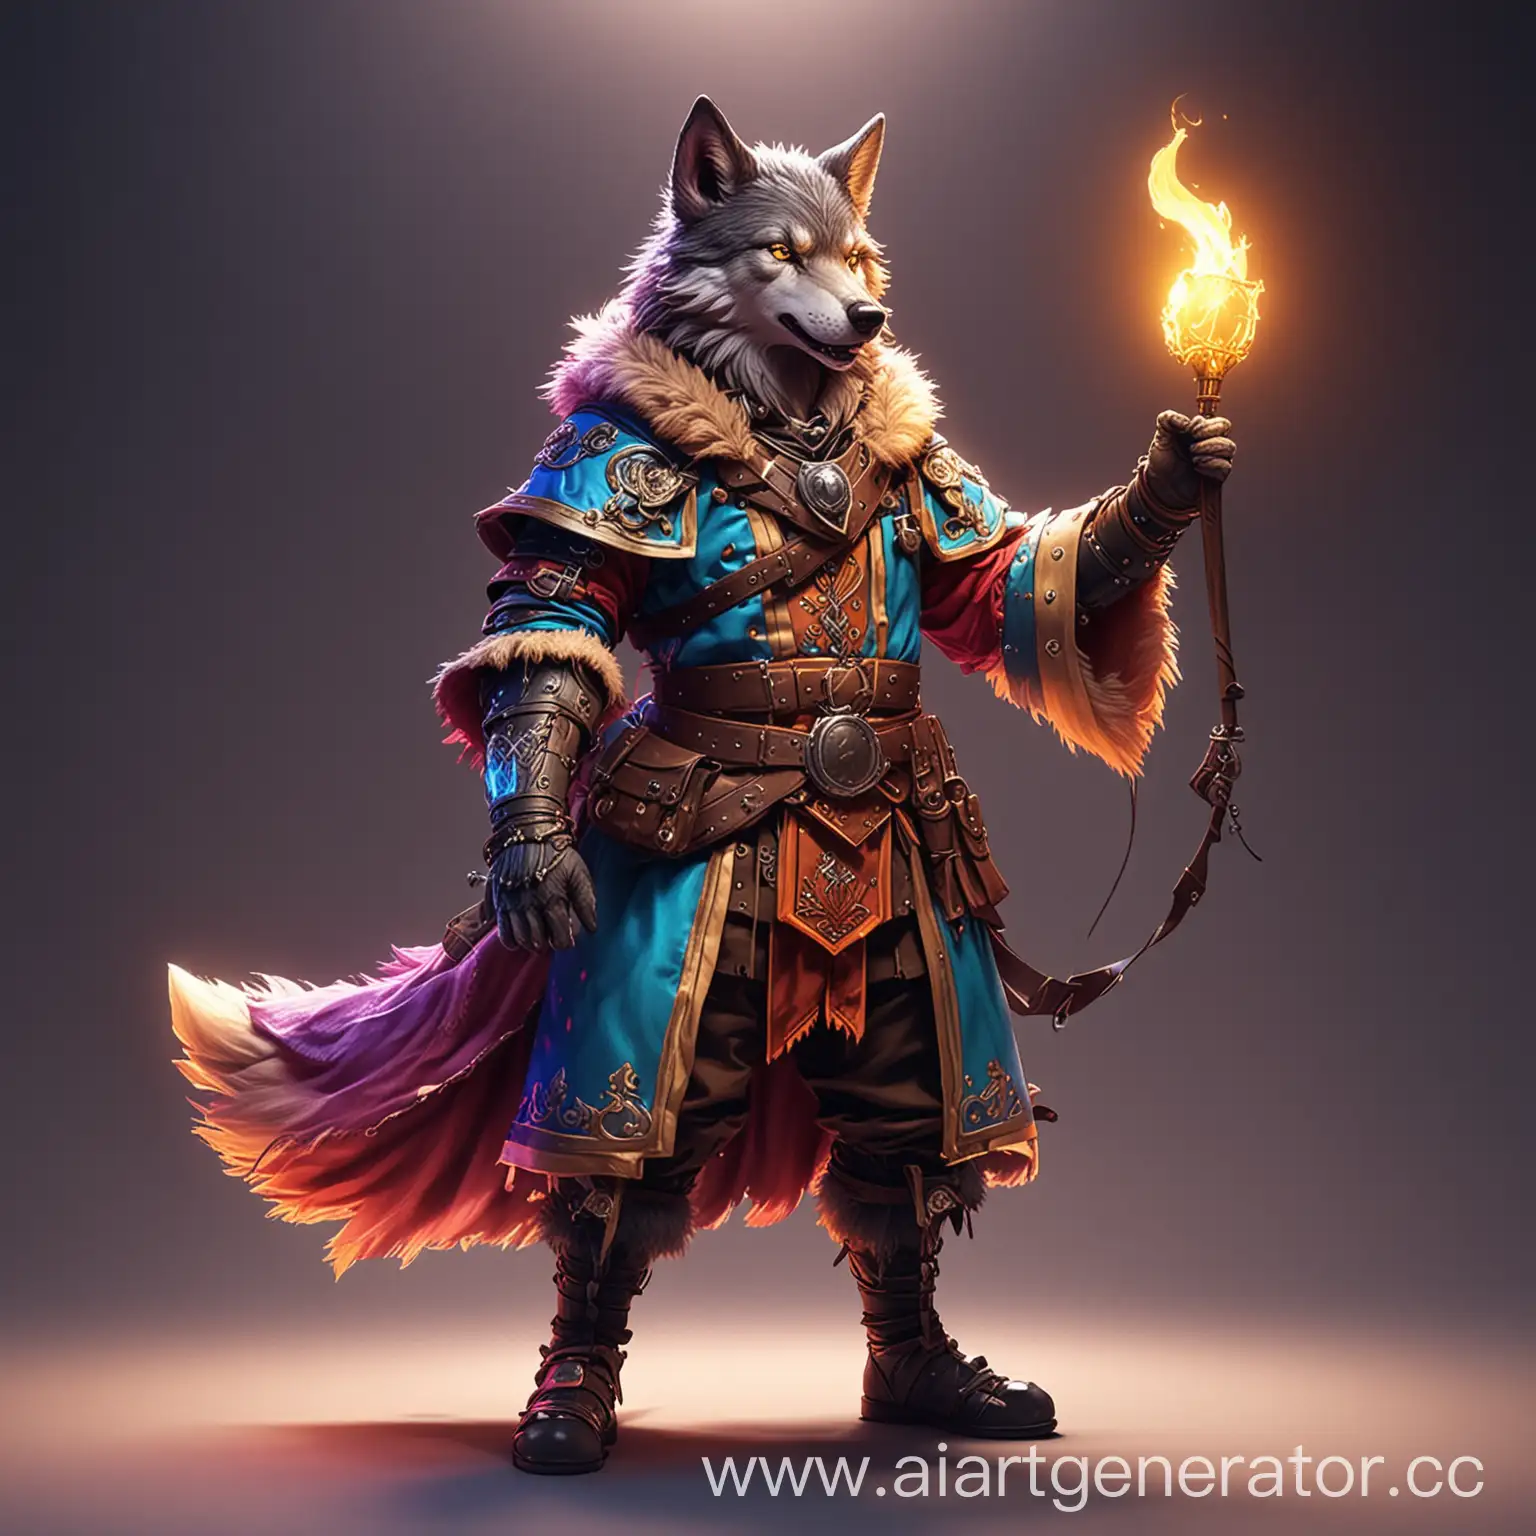 Neon-Style-Medieval-Bard-Wolf-Anime-Furry-in-Bright-Glowing-Costume